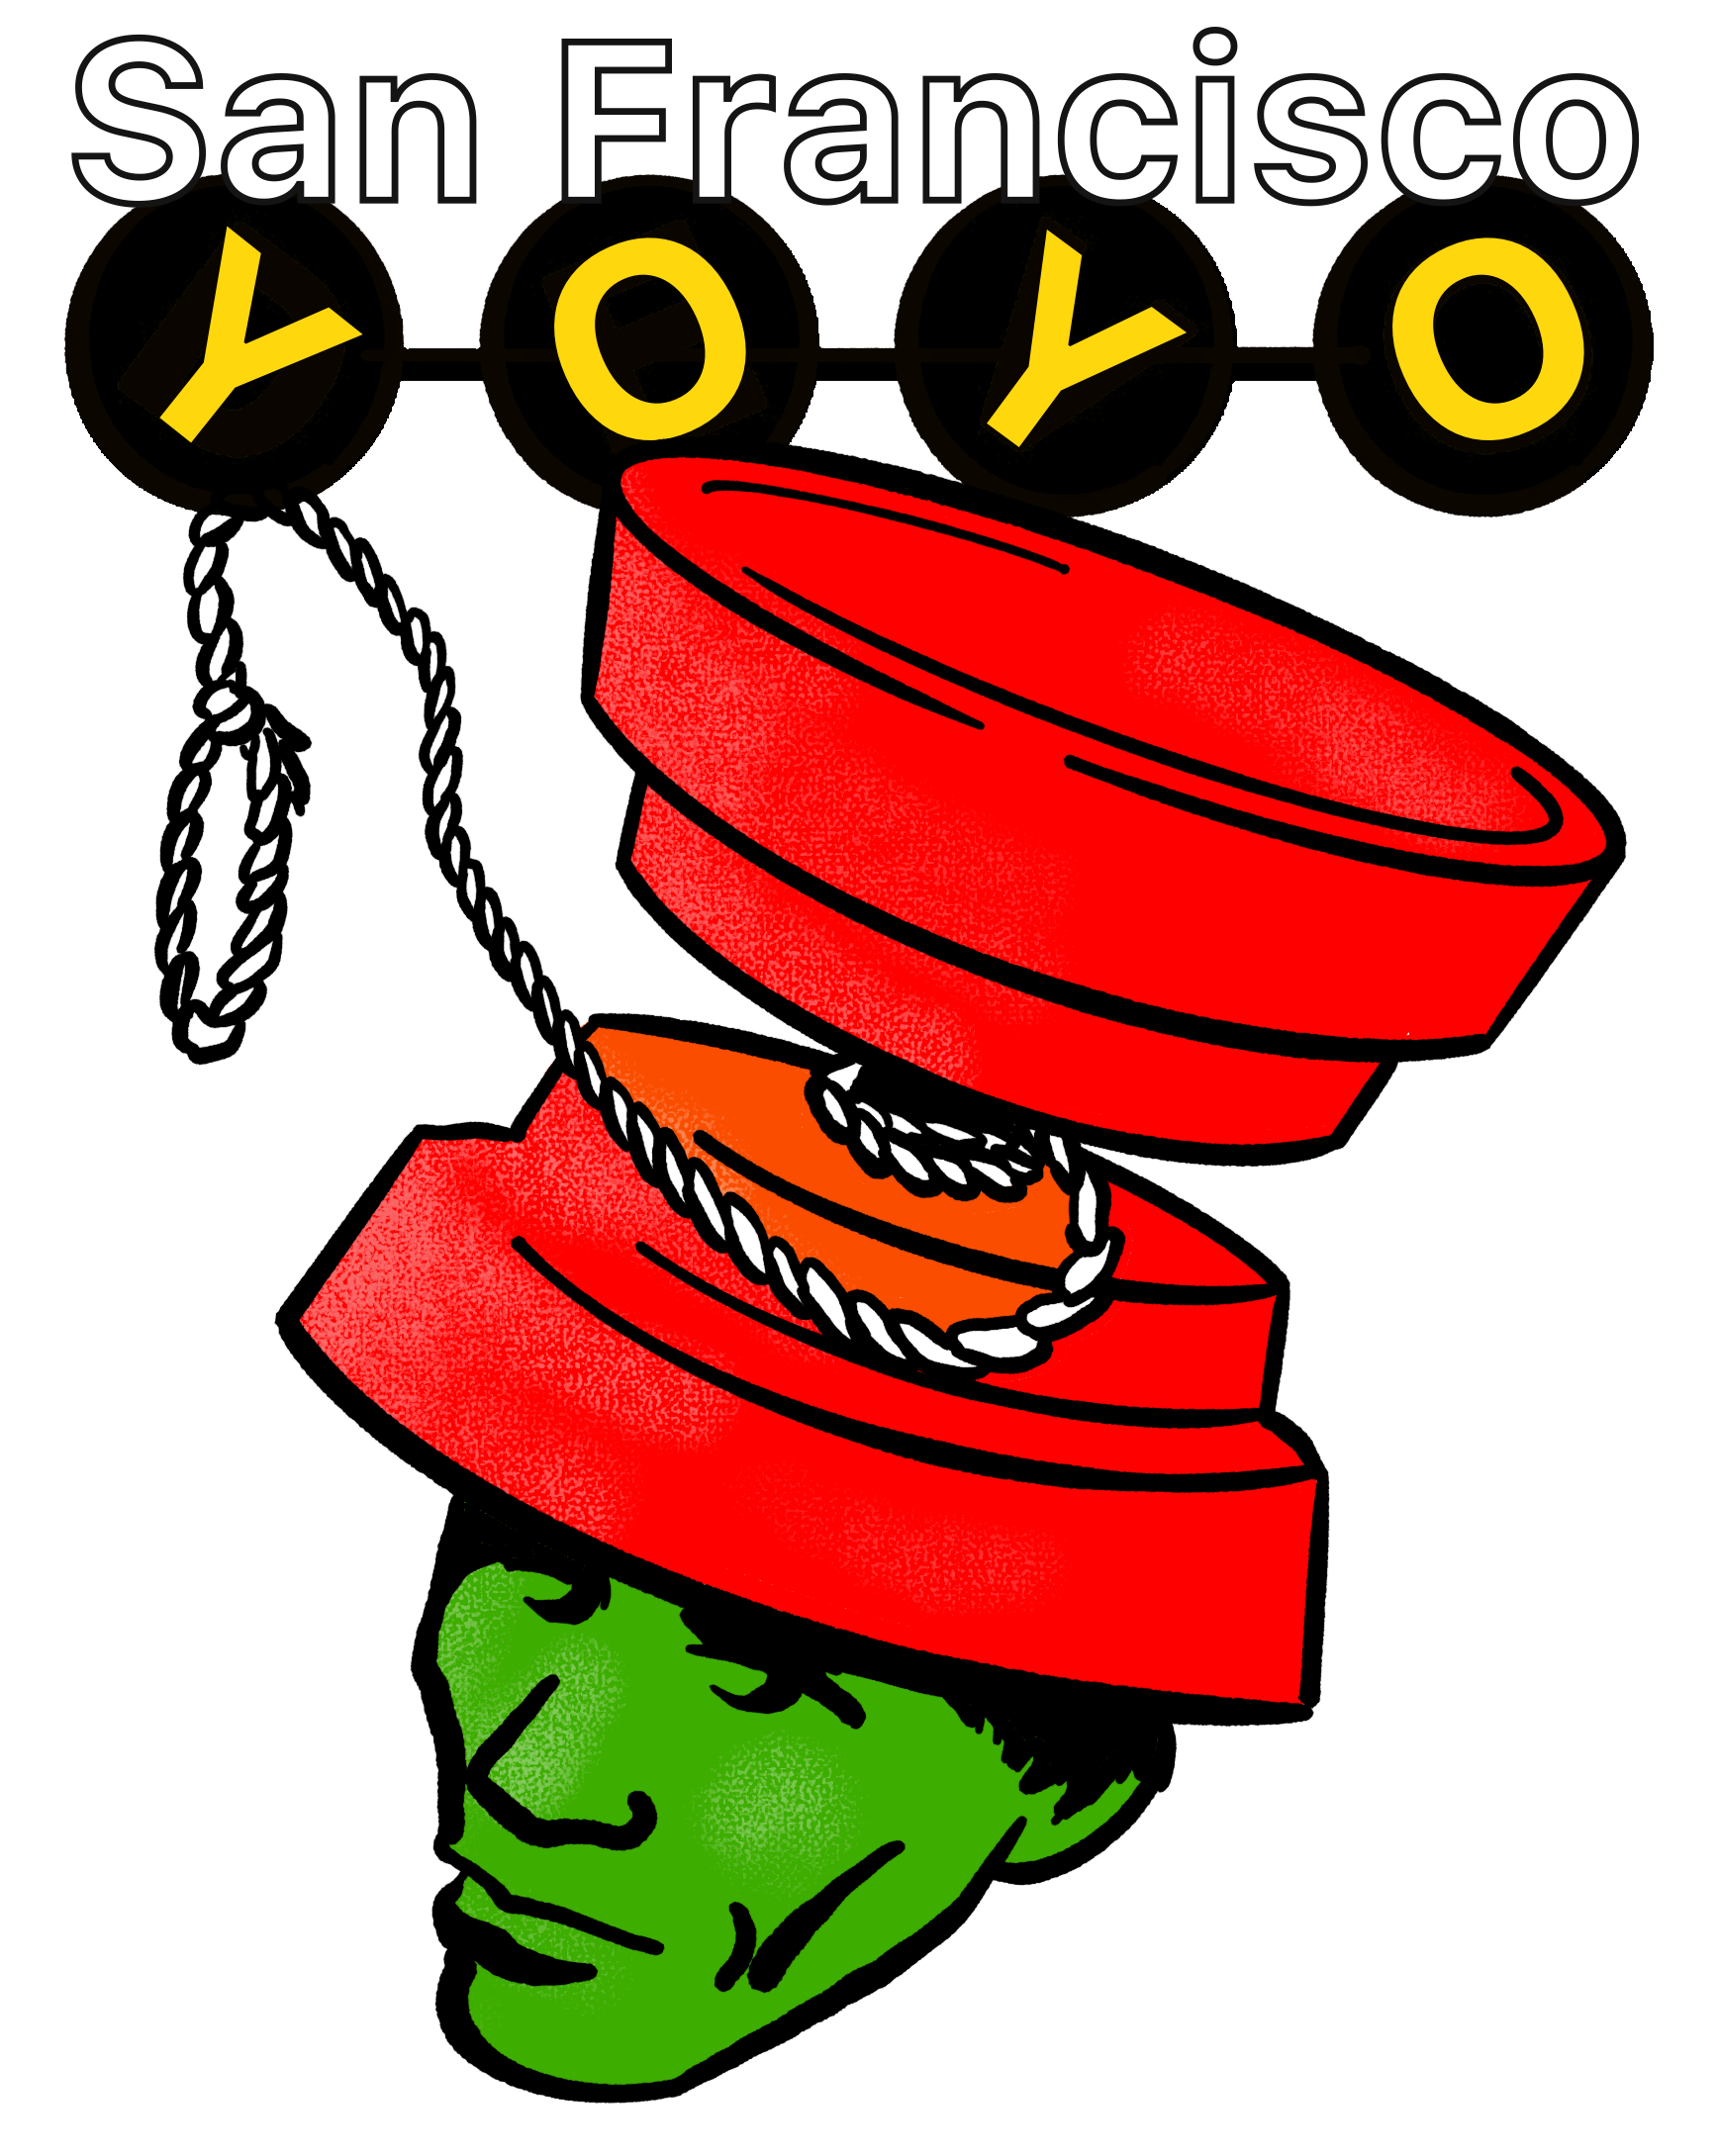 A drawing of a man's head with a giant yo-yo as a hat. It's inspired by the Devo band logo of a man wearing a stepped red hat.